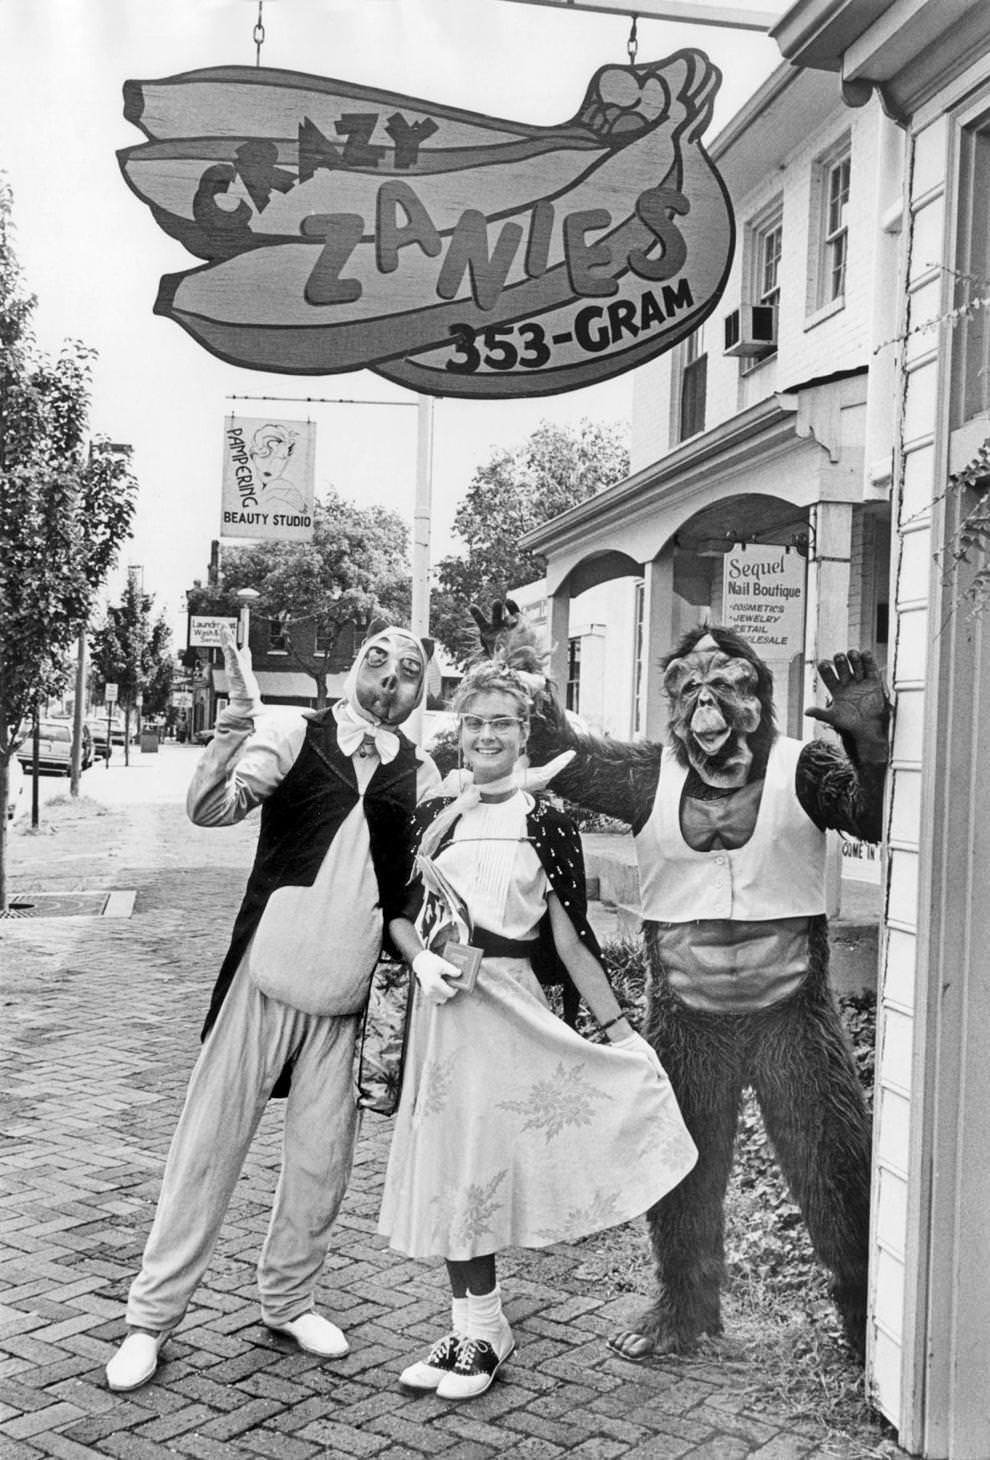 Employees of Crazy Zanies in Carytown were ready to deliver messages and singing telegrams around Richmond, 1987.